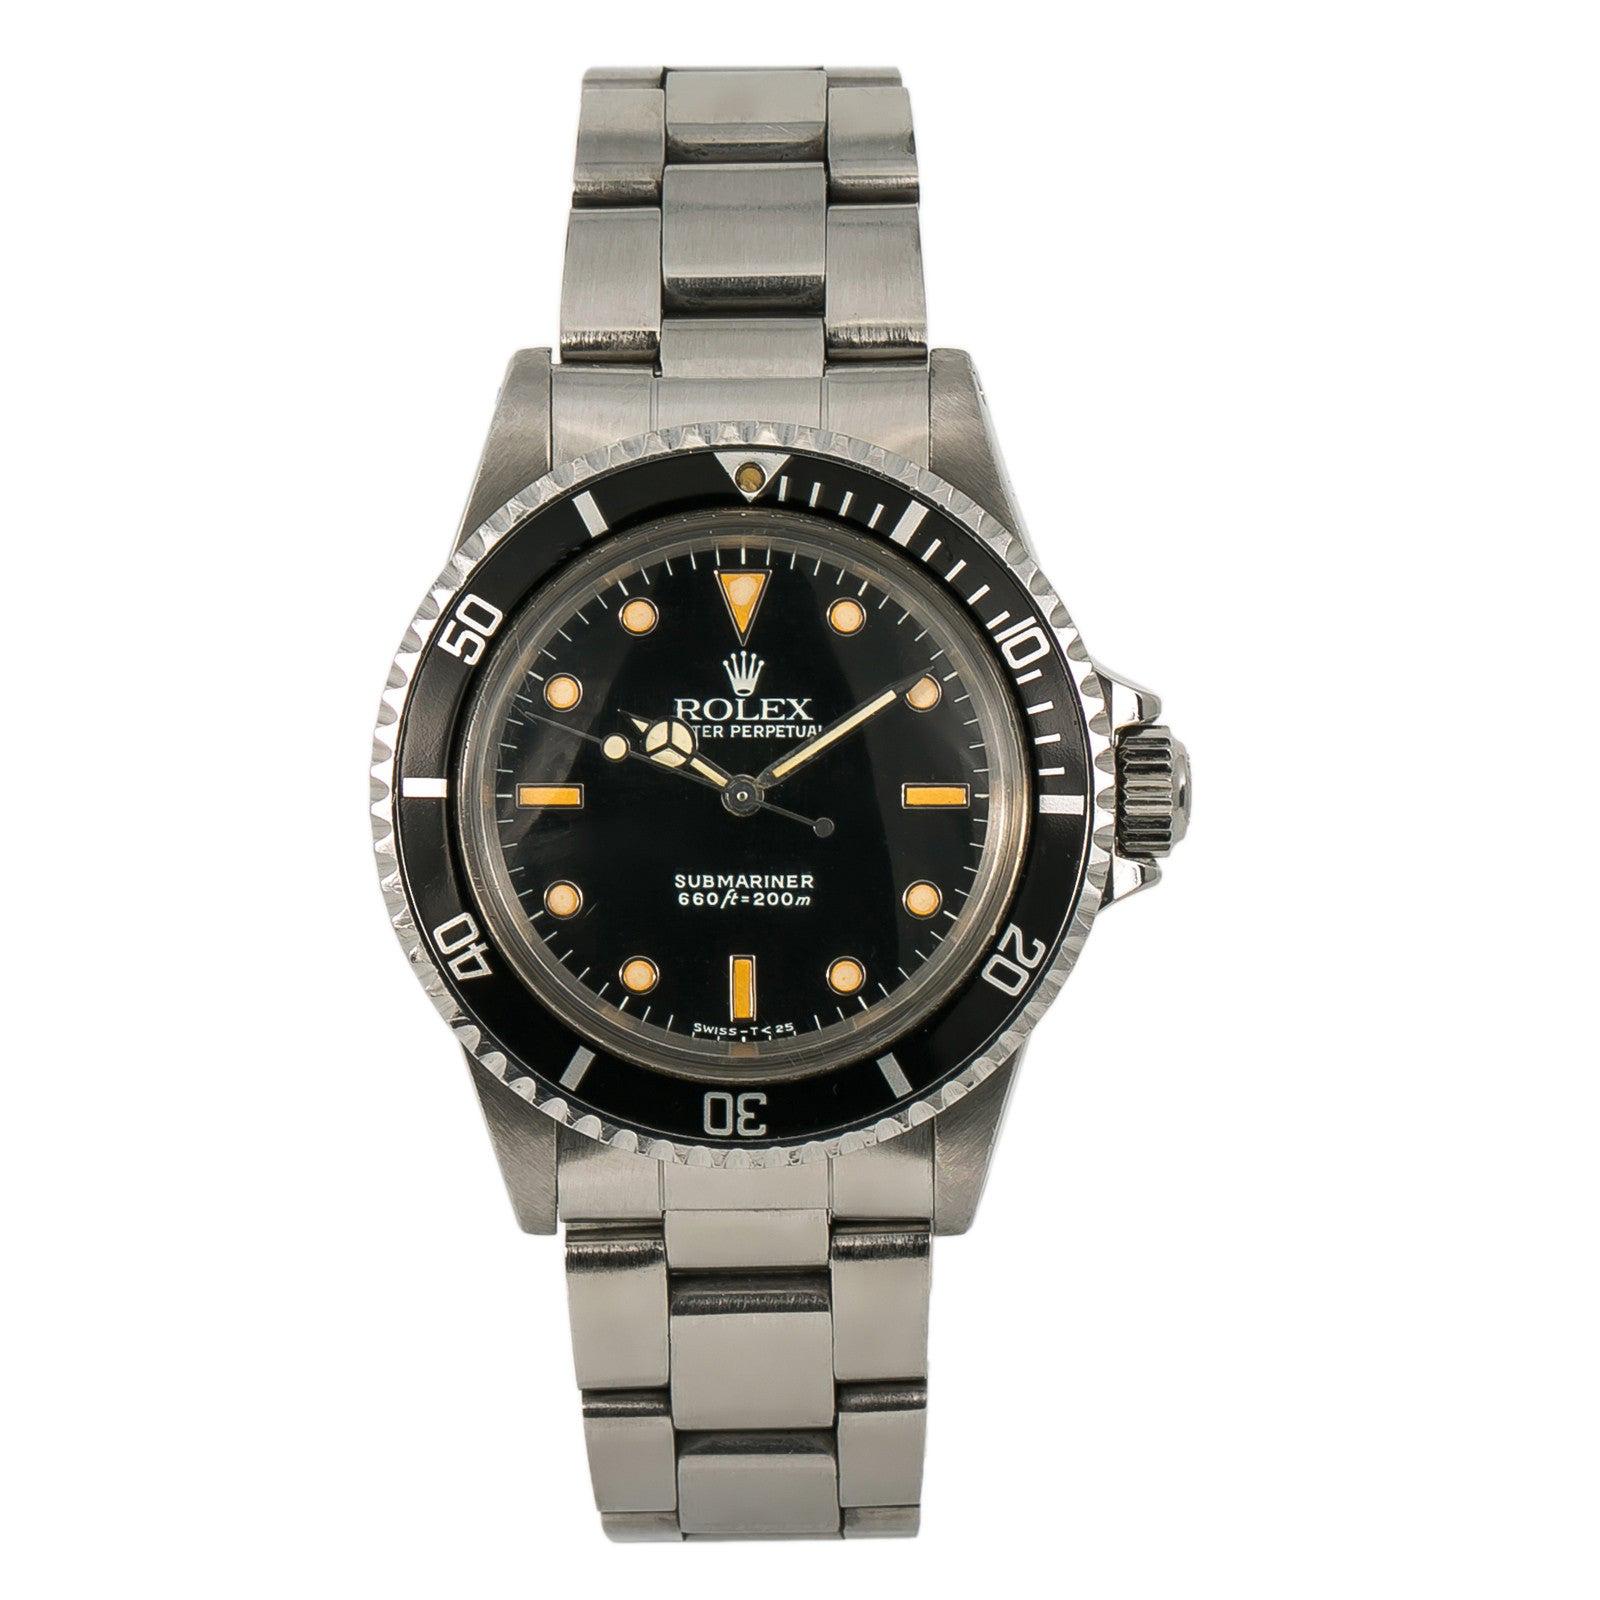 Rolex Submariner 5513, Silver Dial, Certified and Warranty